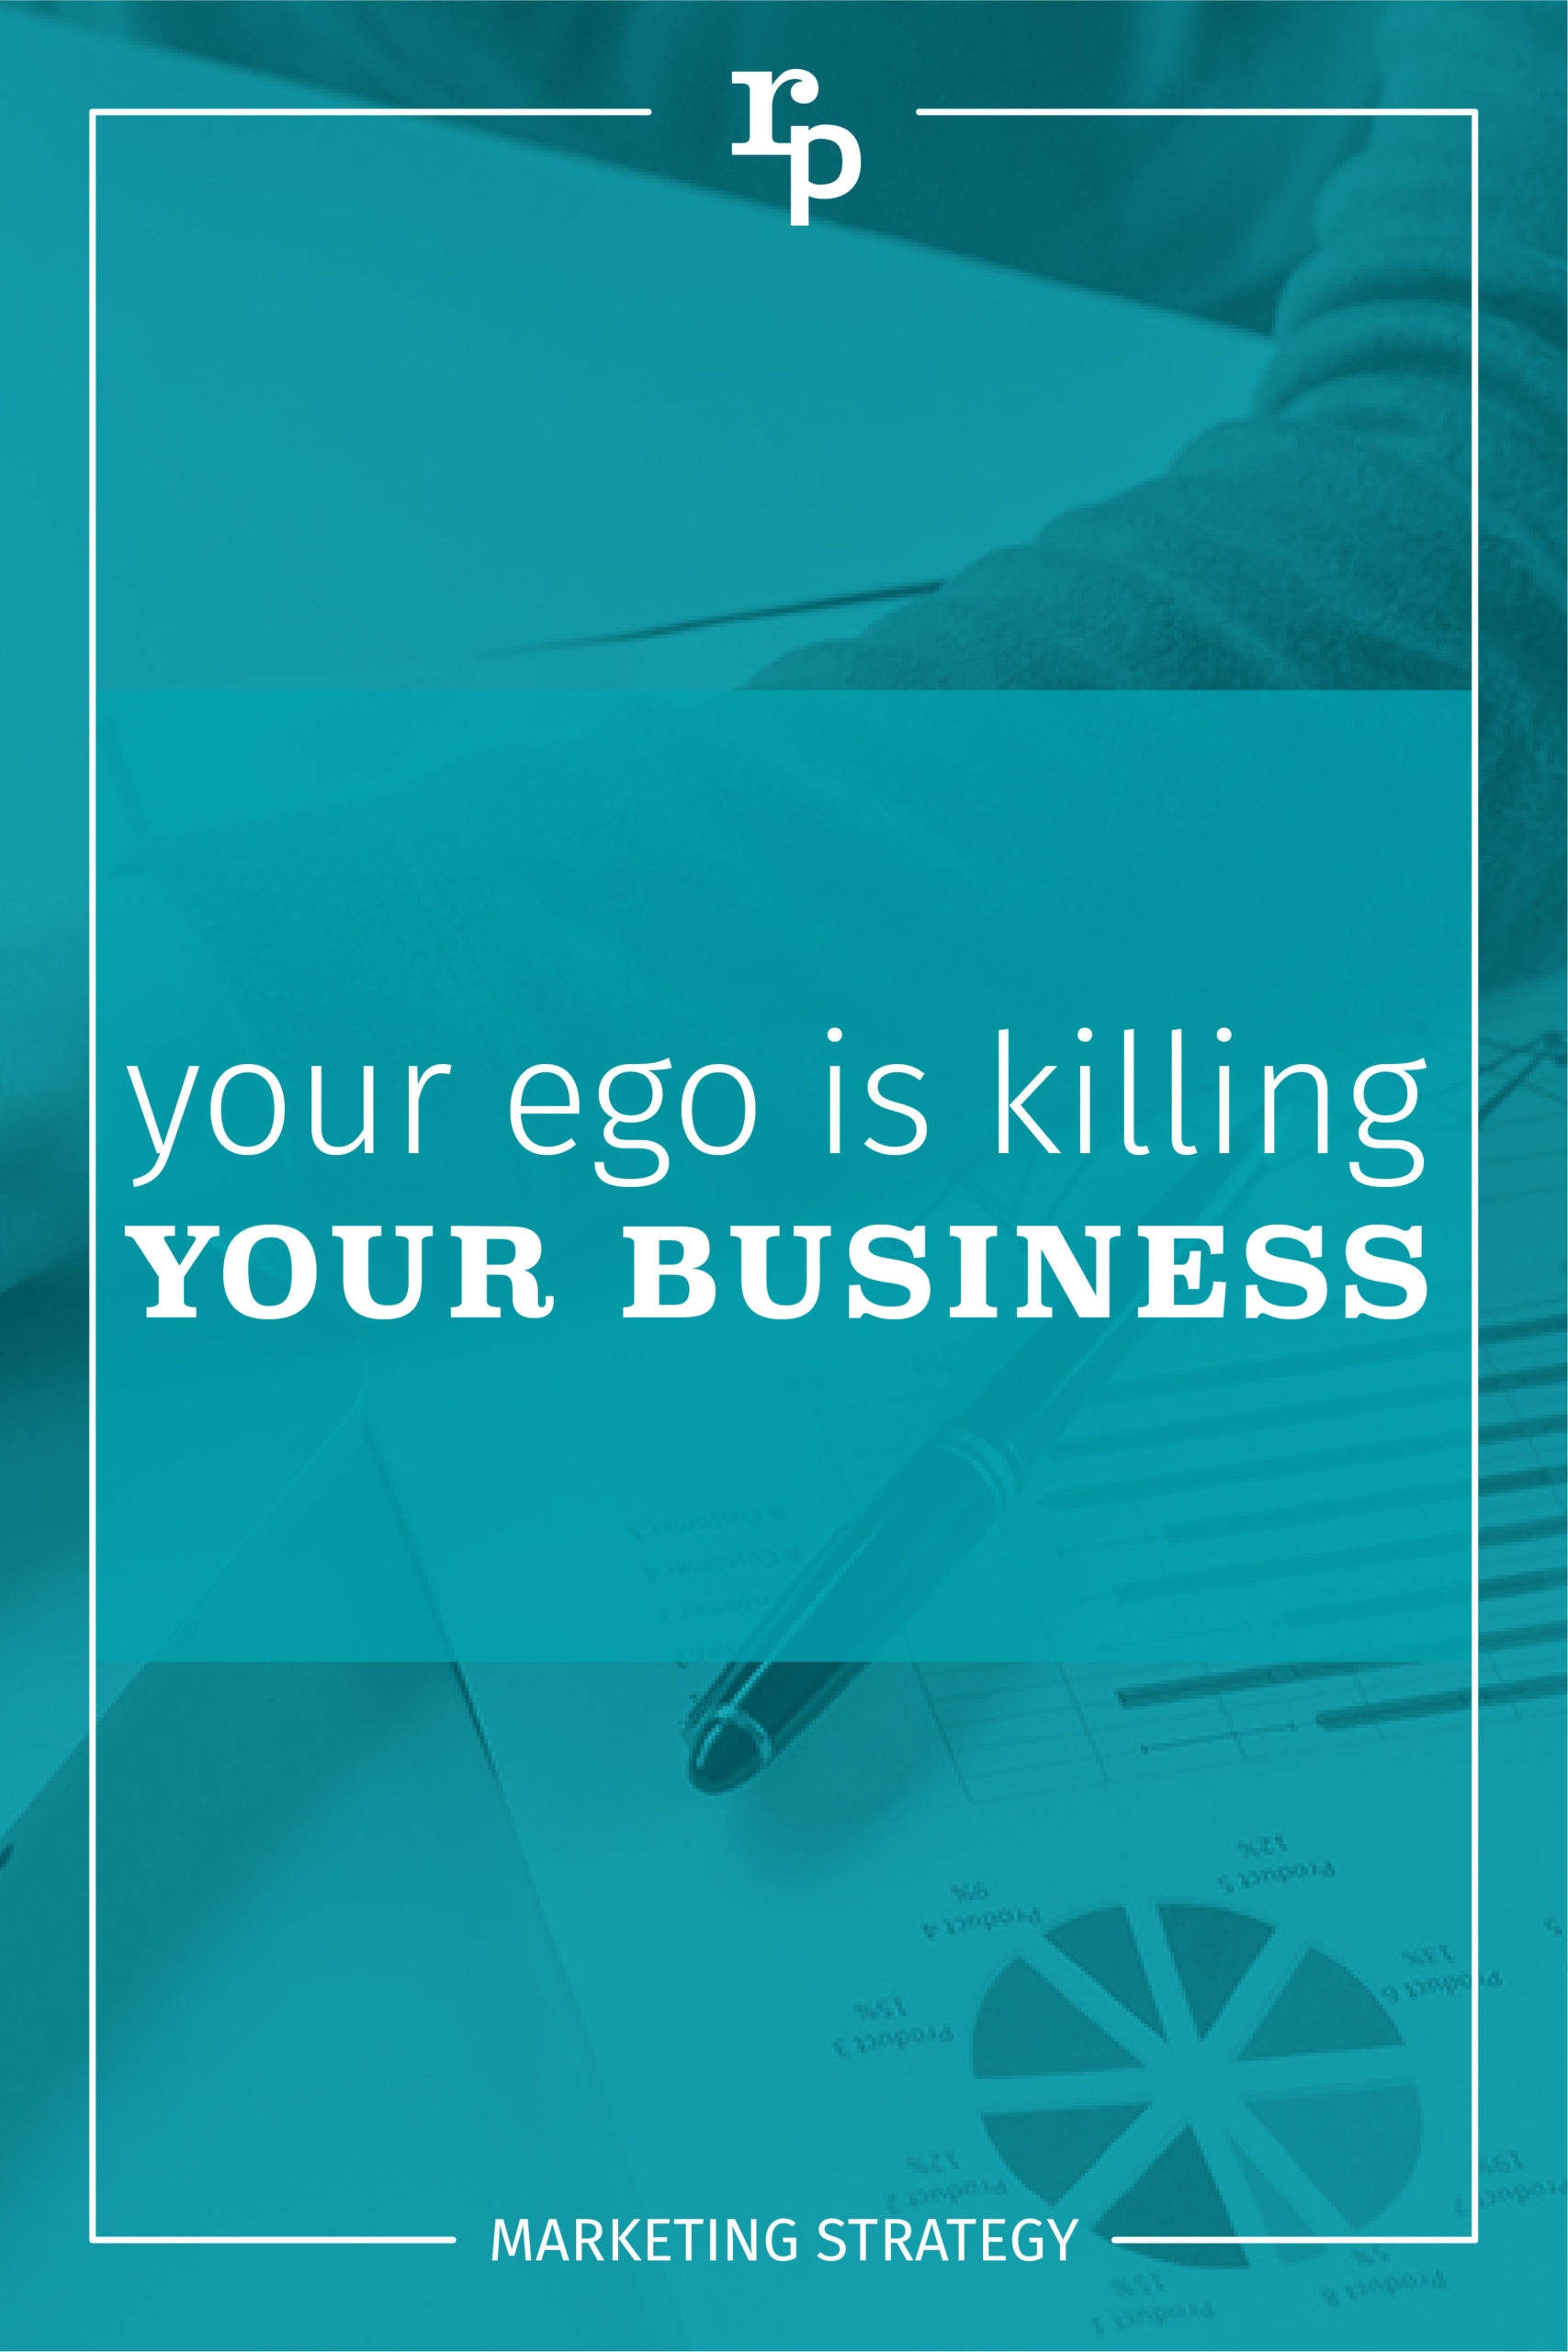 your ego is killing your business strategy1 pin teal scaled